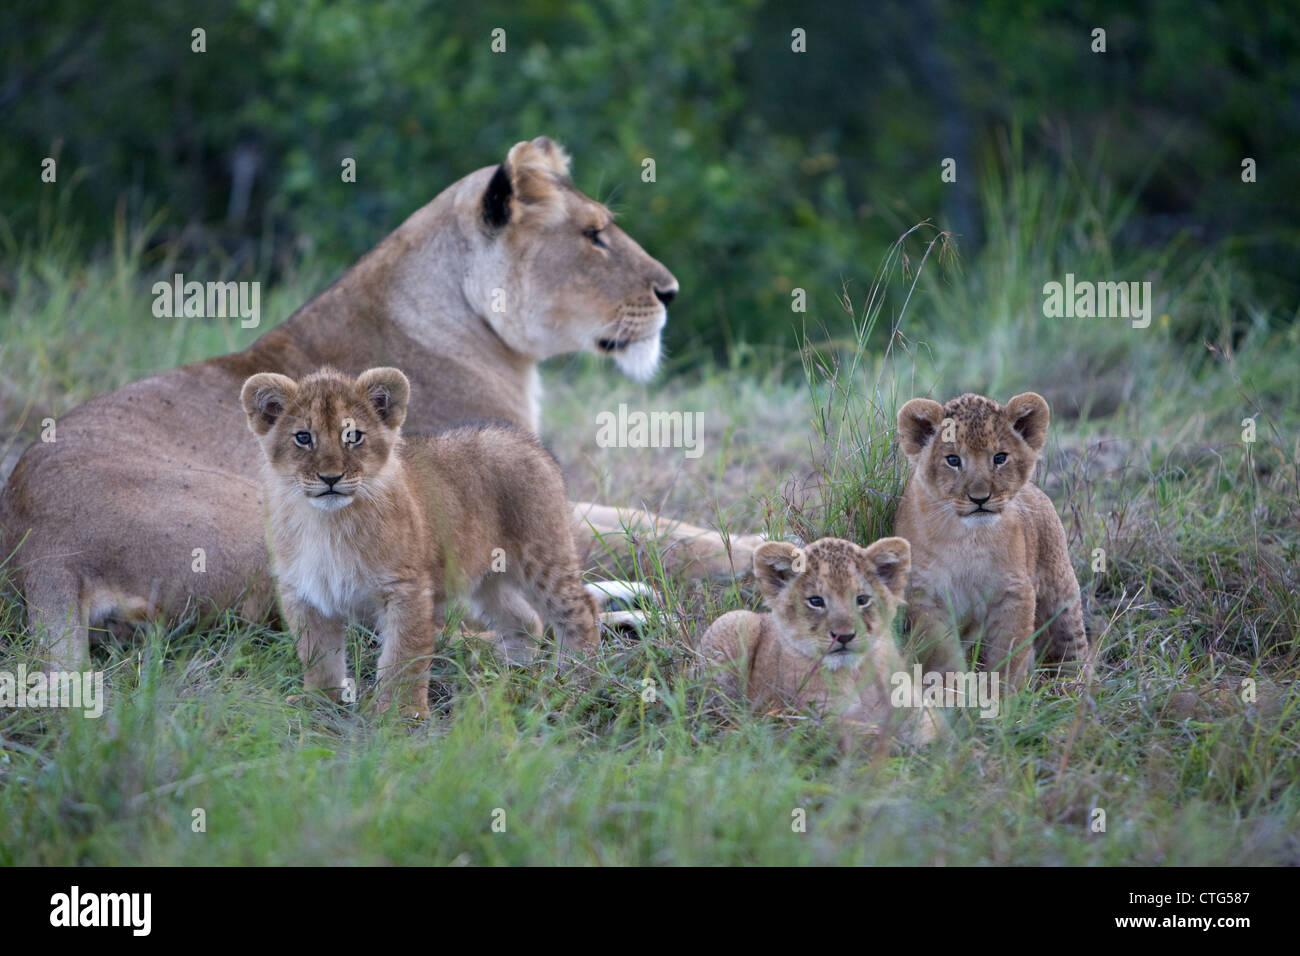 lion cubs with mother lioness in Tanzania Stock Photo